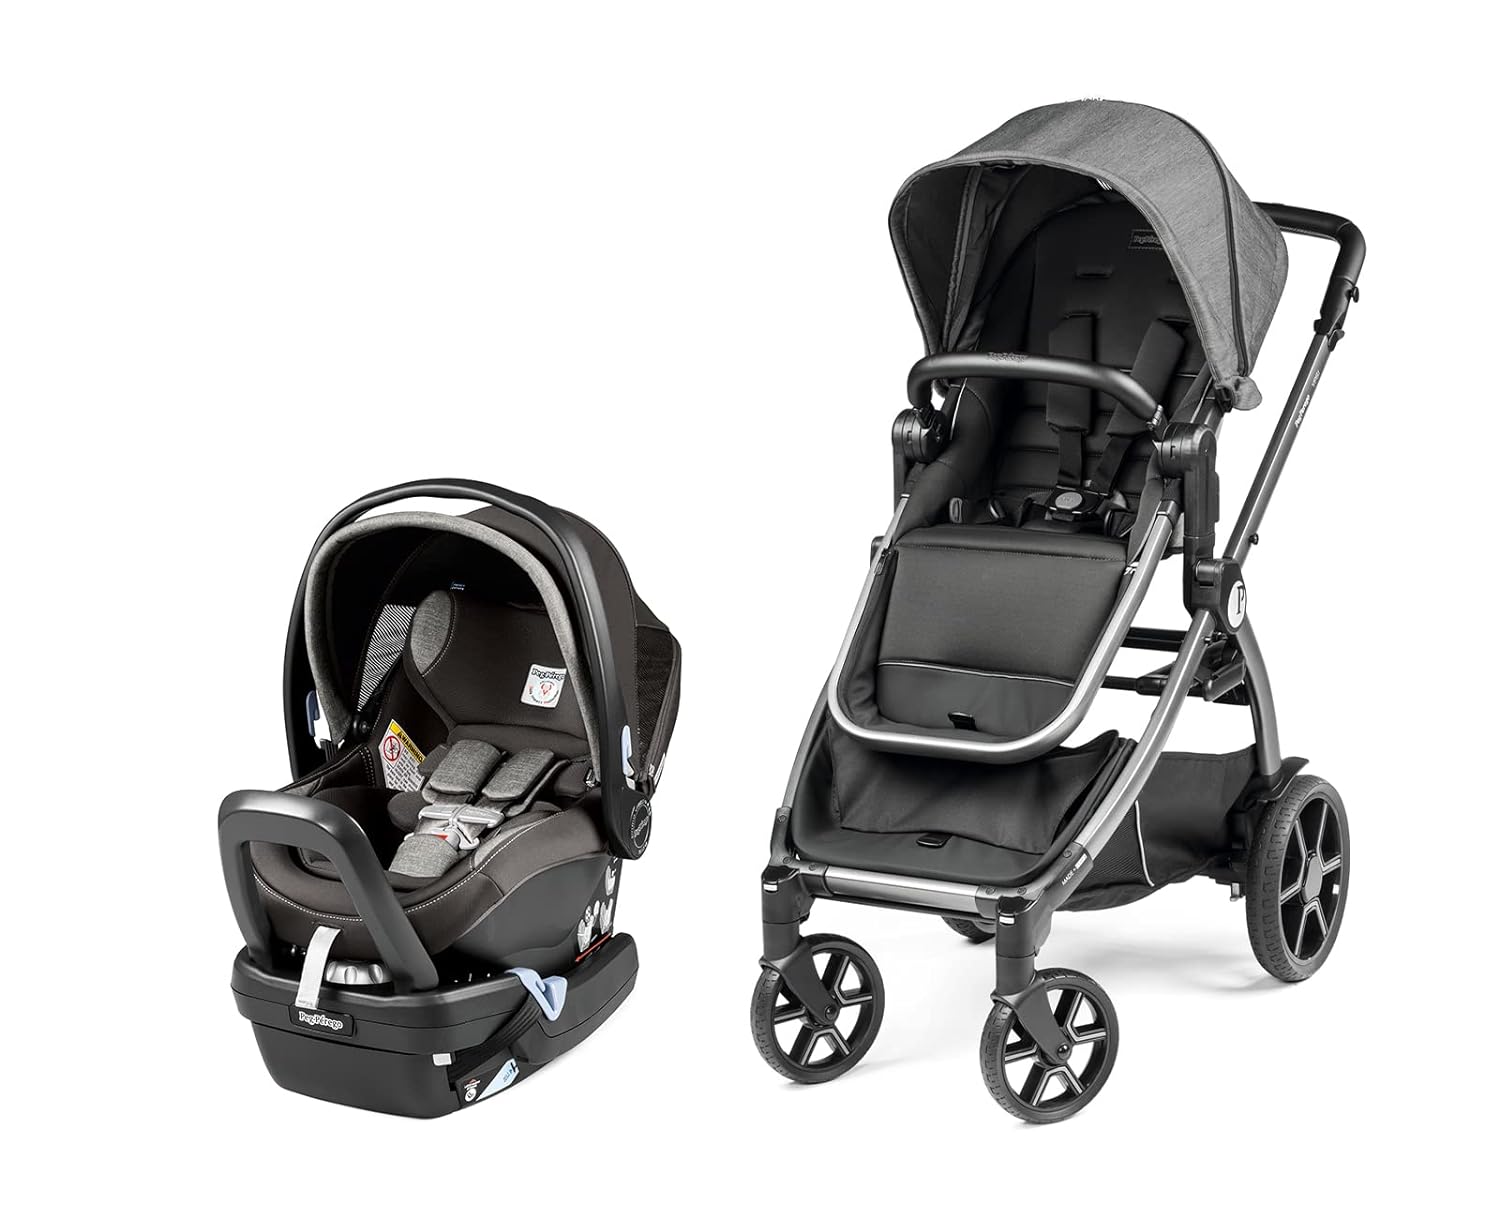 Peg Perego Ypsi Travel System - Includes Ypsi Lightweight Reversible Stroller and Primo Viaggio 4-35 Nido Infant Car Seat - Made in Italy - Onyx (Black) - Peg Perego Ypsi Travel System Review